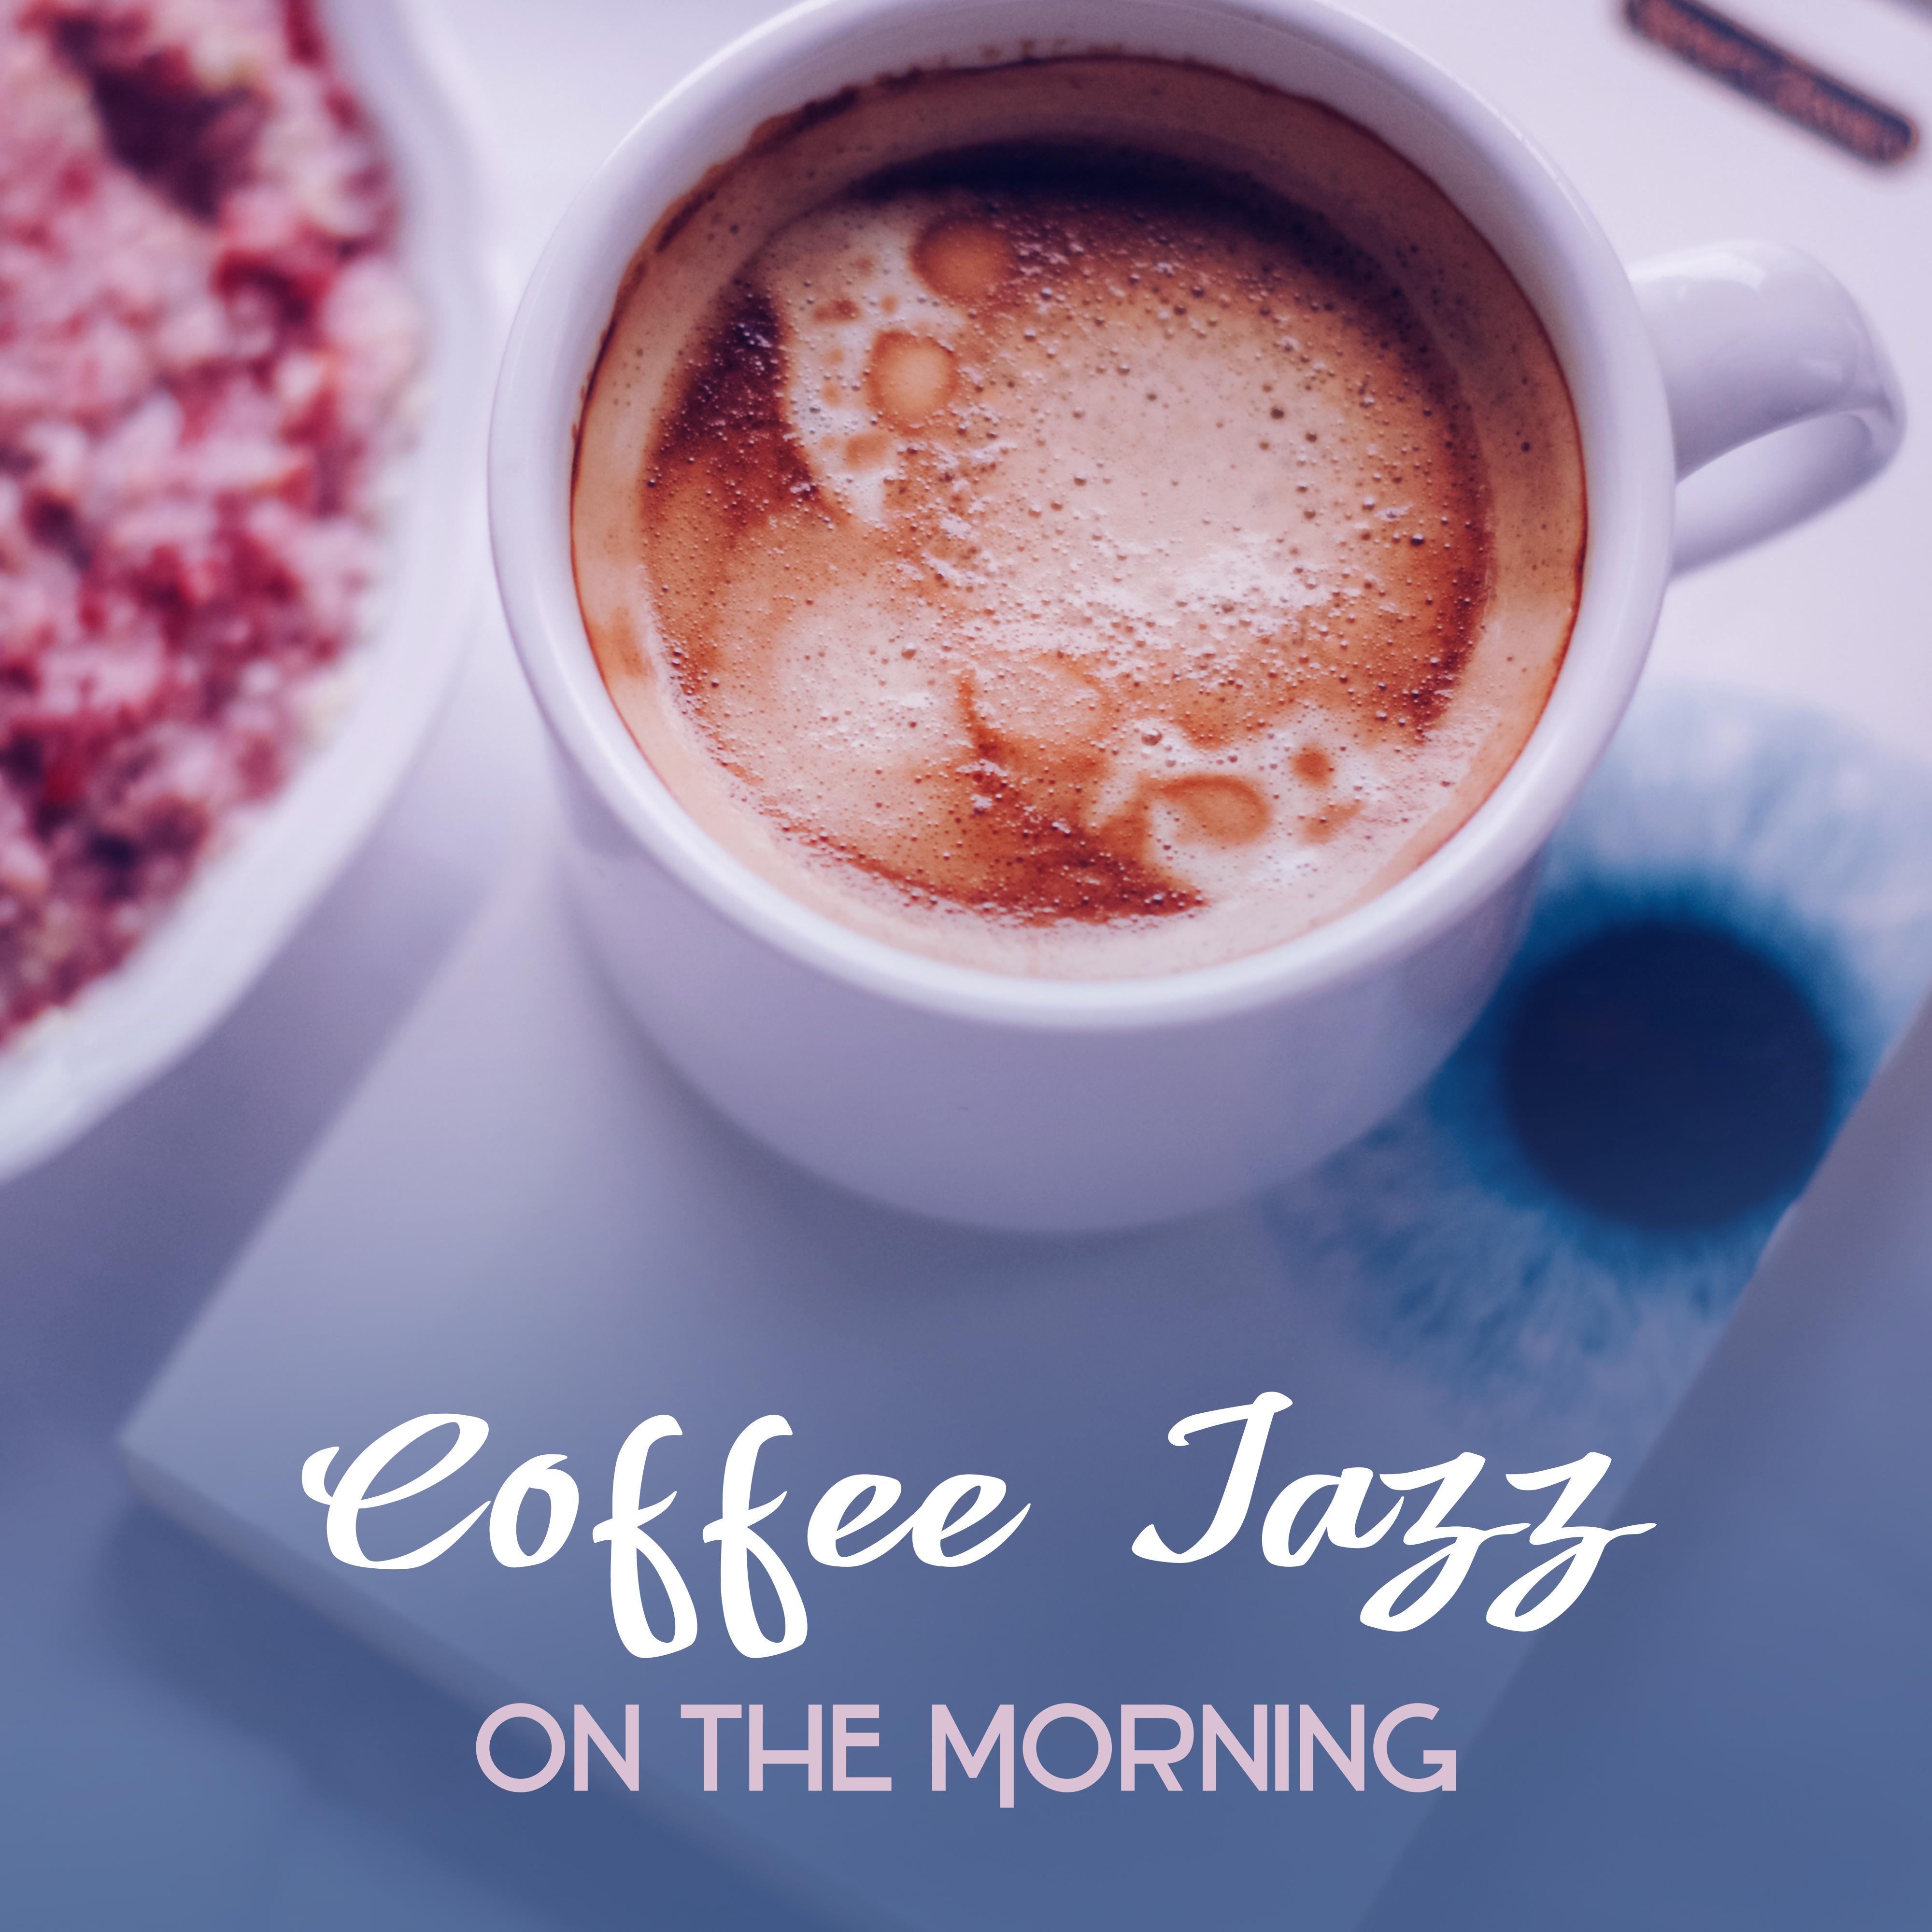 Coffee Jazz on The Morning  Instrumental Jazz, Mellow Sounds of Classic Jazz, Relaxing Music